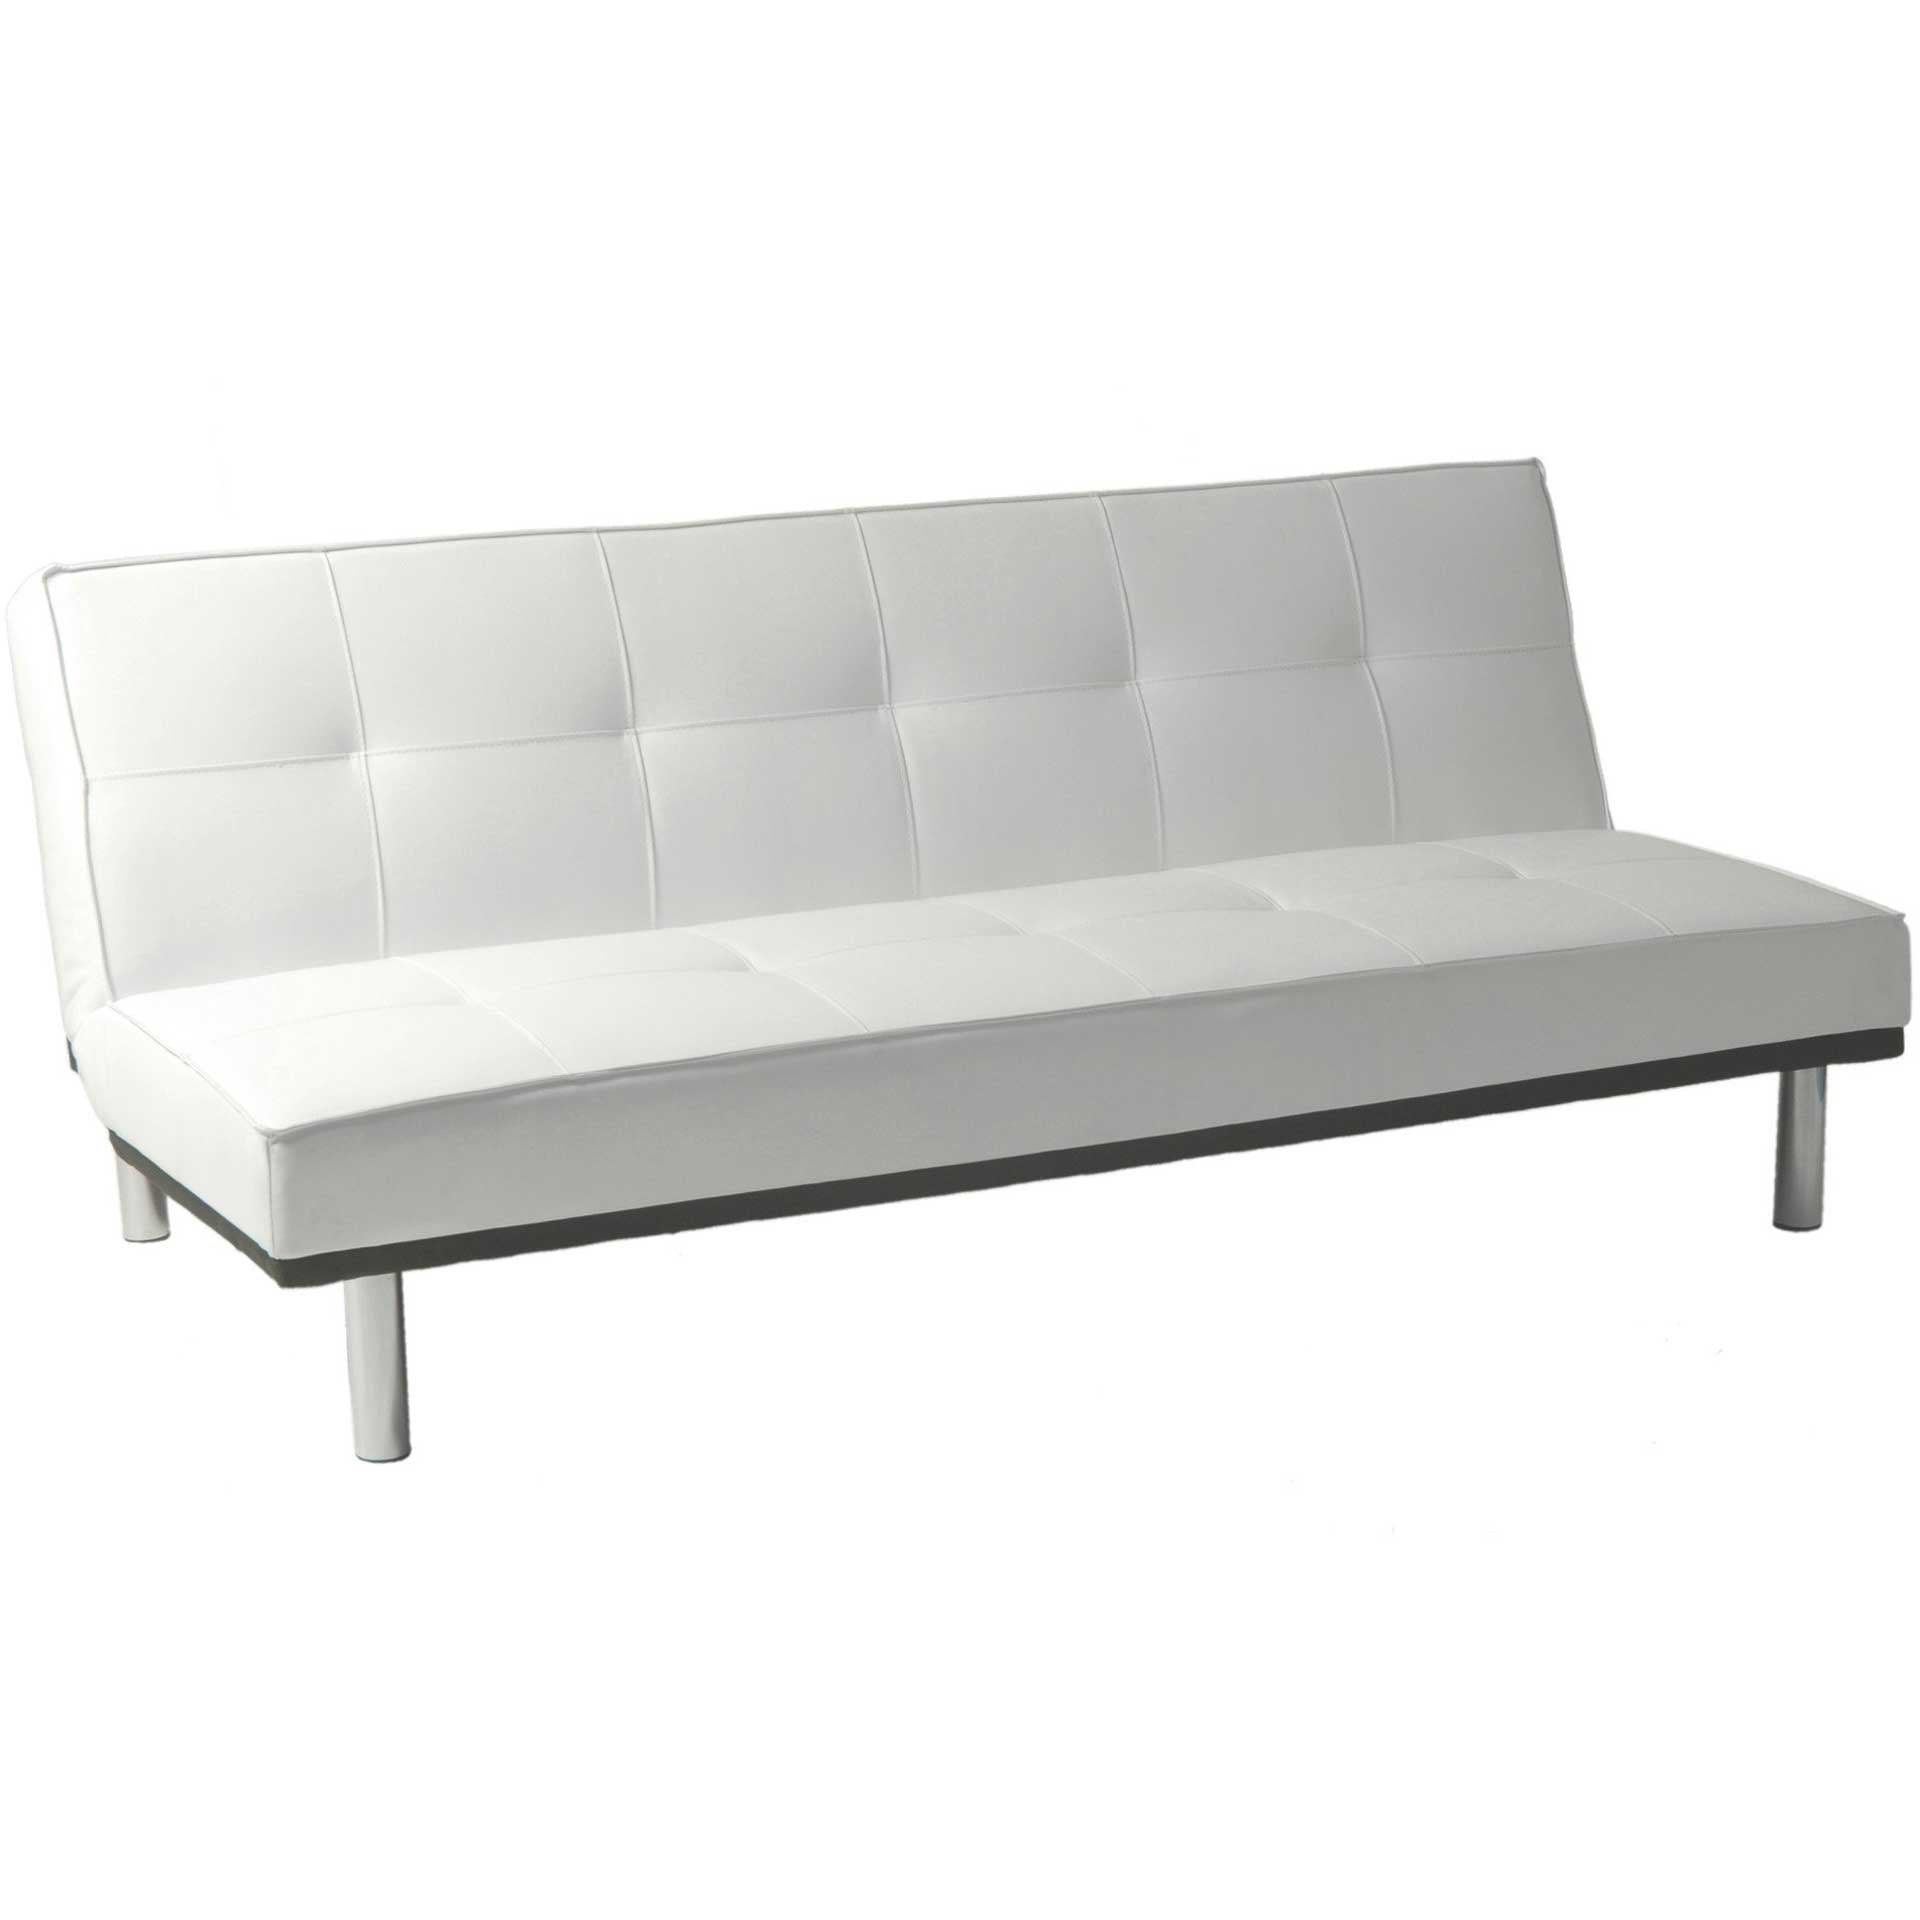 Sev Sofa Bed White Leatherette/Stainless Steel